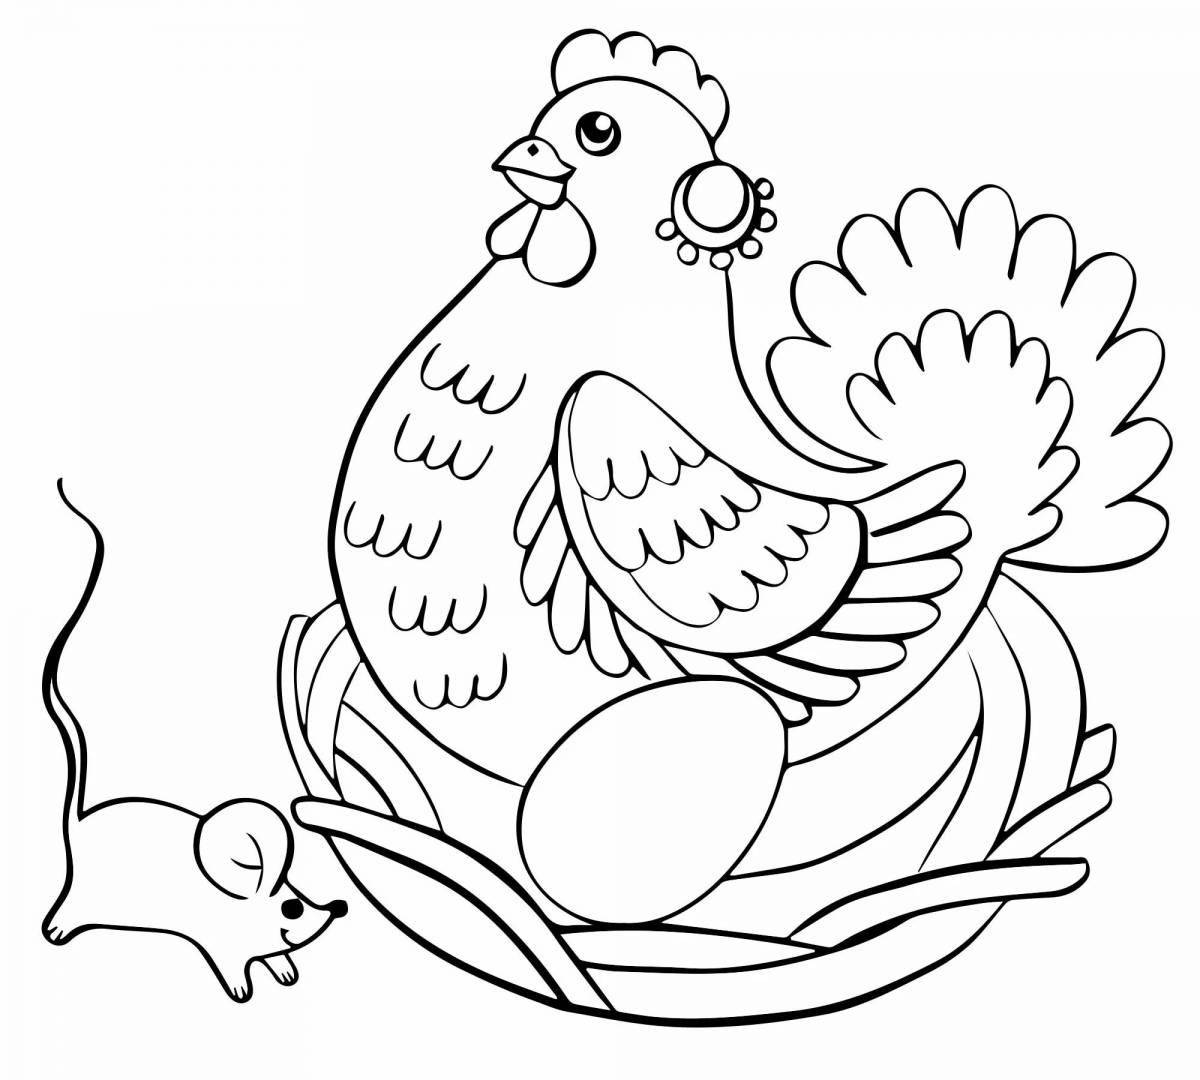 Fun coloring book for preschoolers 2-3 years old